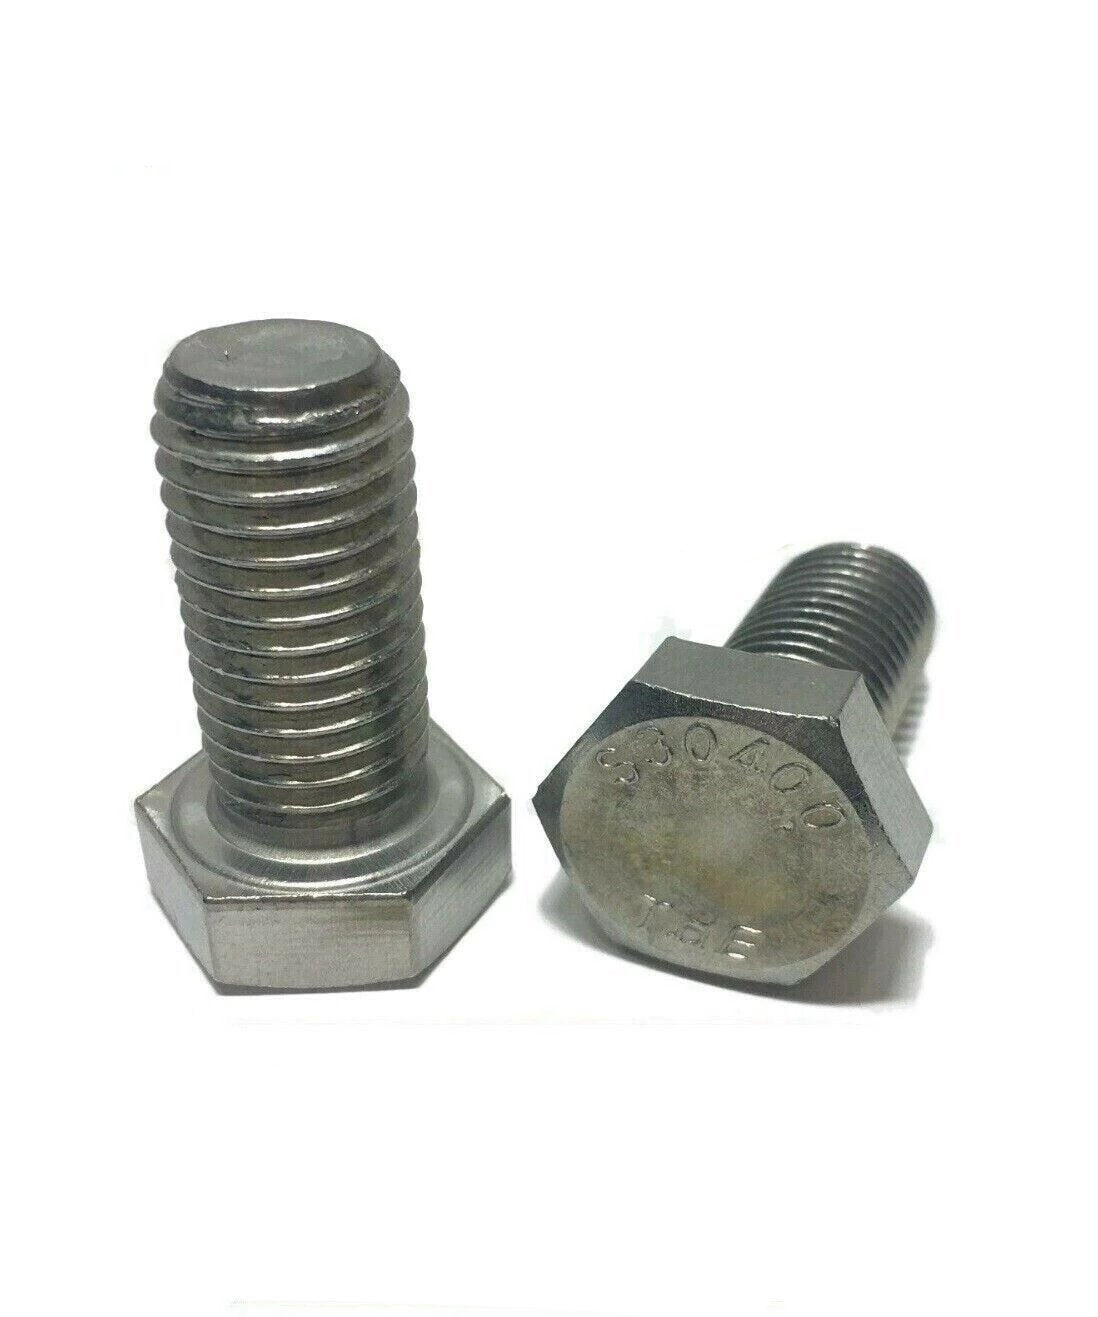 1/2"-13 x 1 1/4" Stainless Steel Hex Cap Screw / Tap Bolt 18-8 / 304